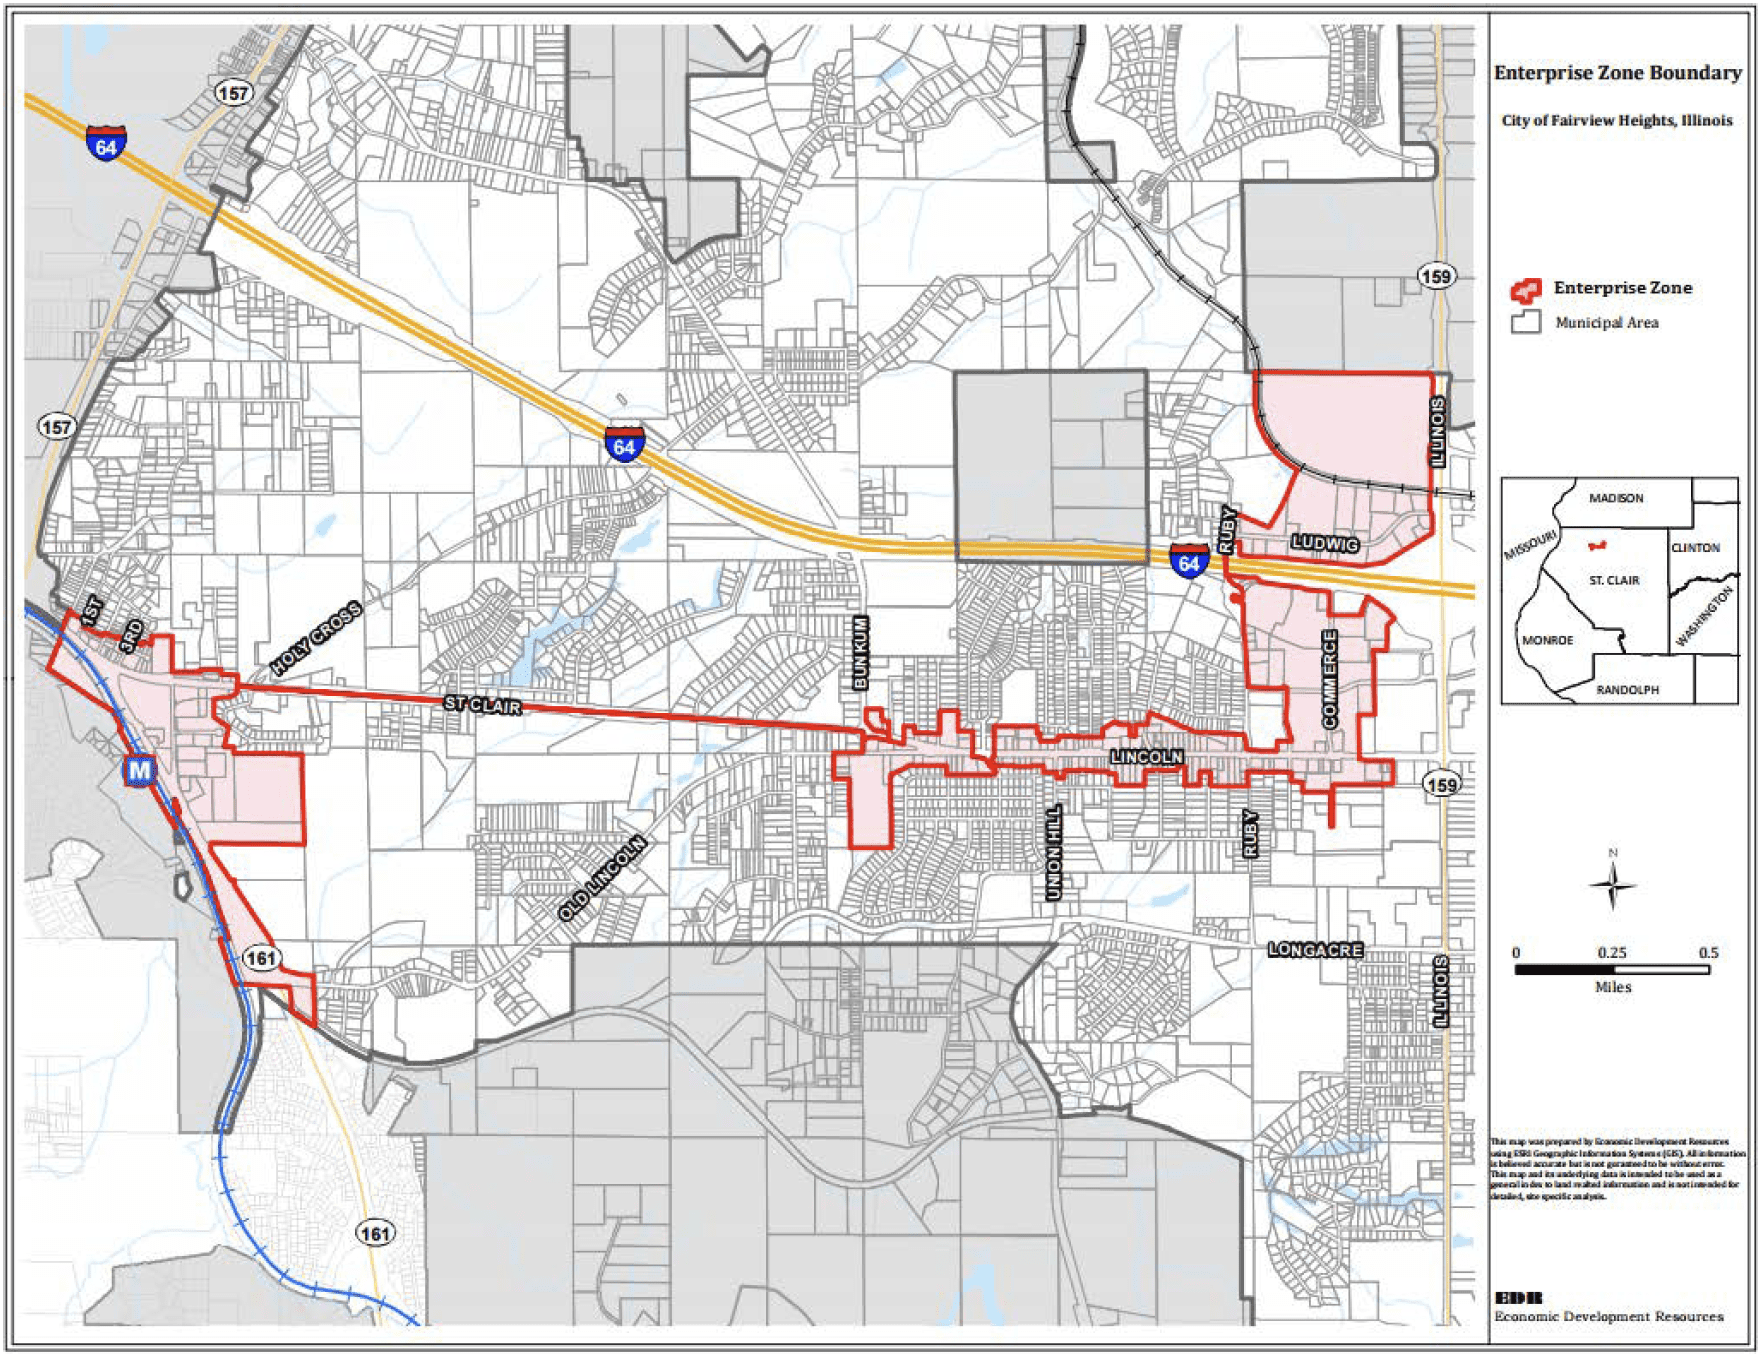 Fairview Heights TIF Districts